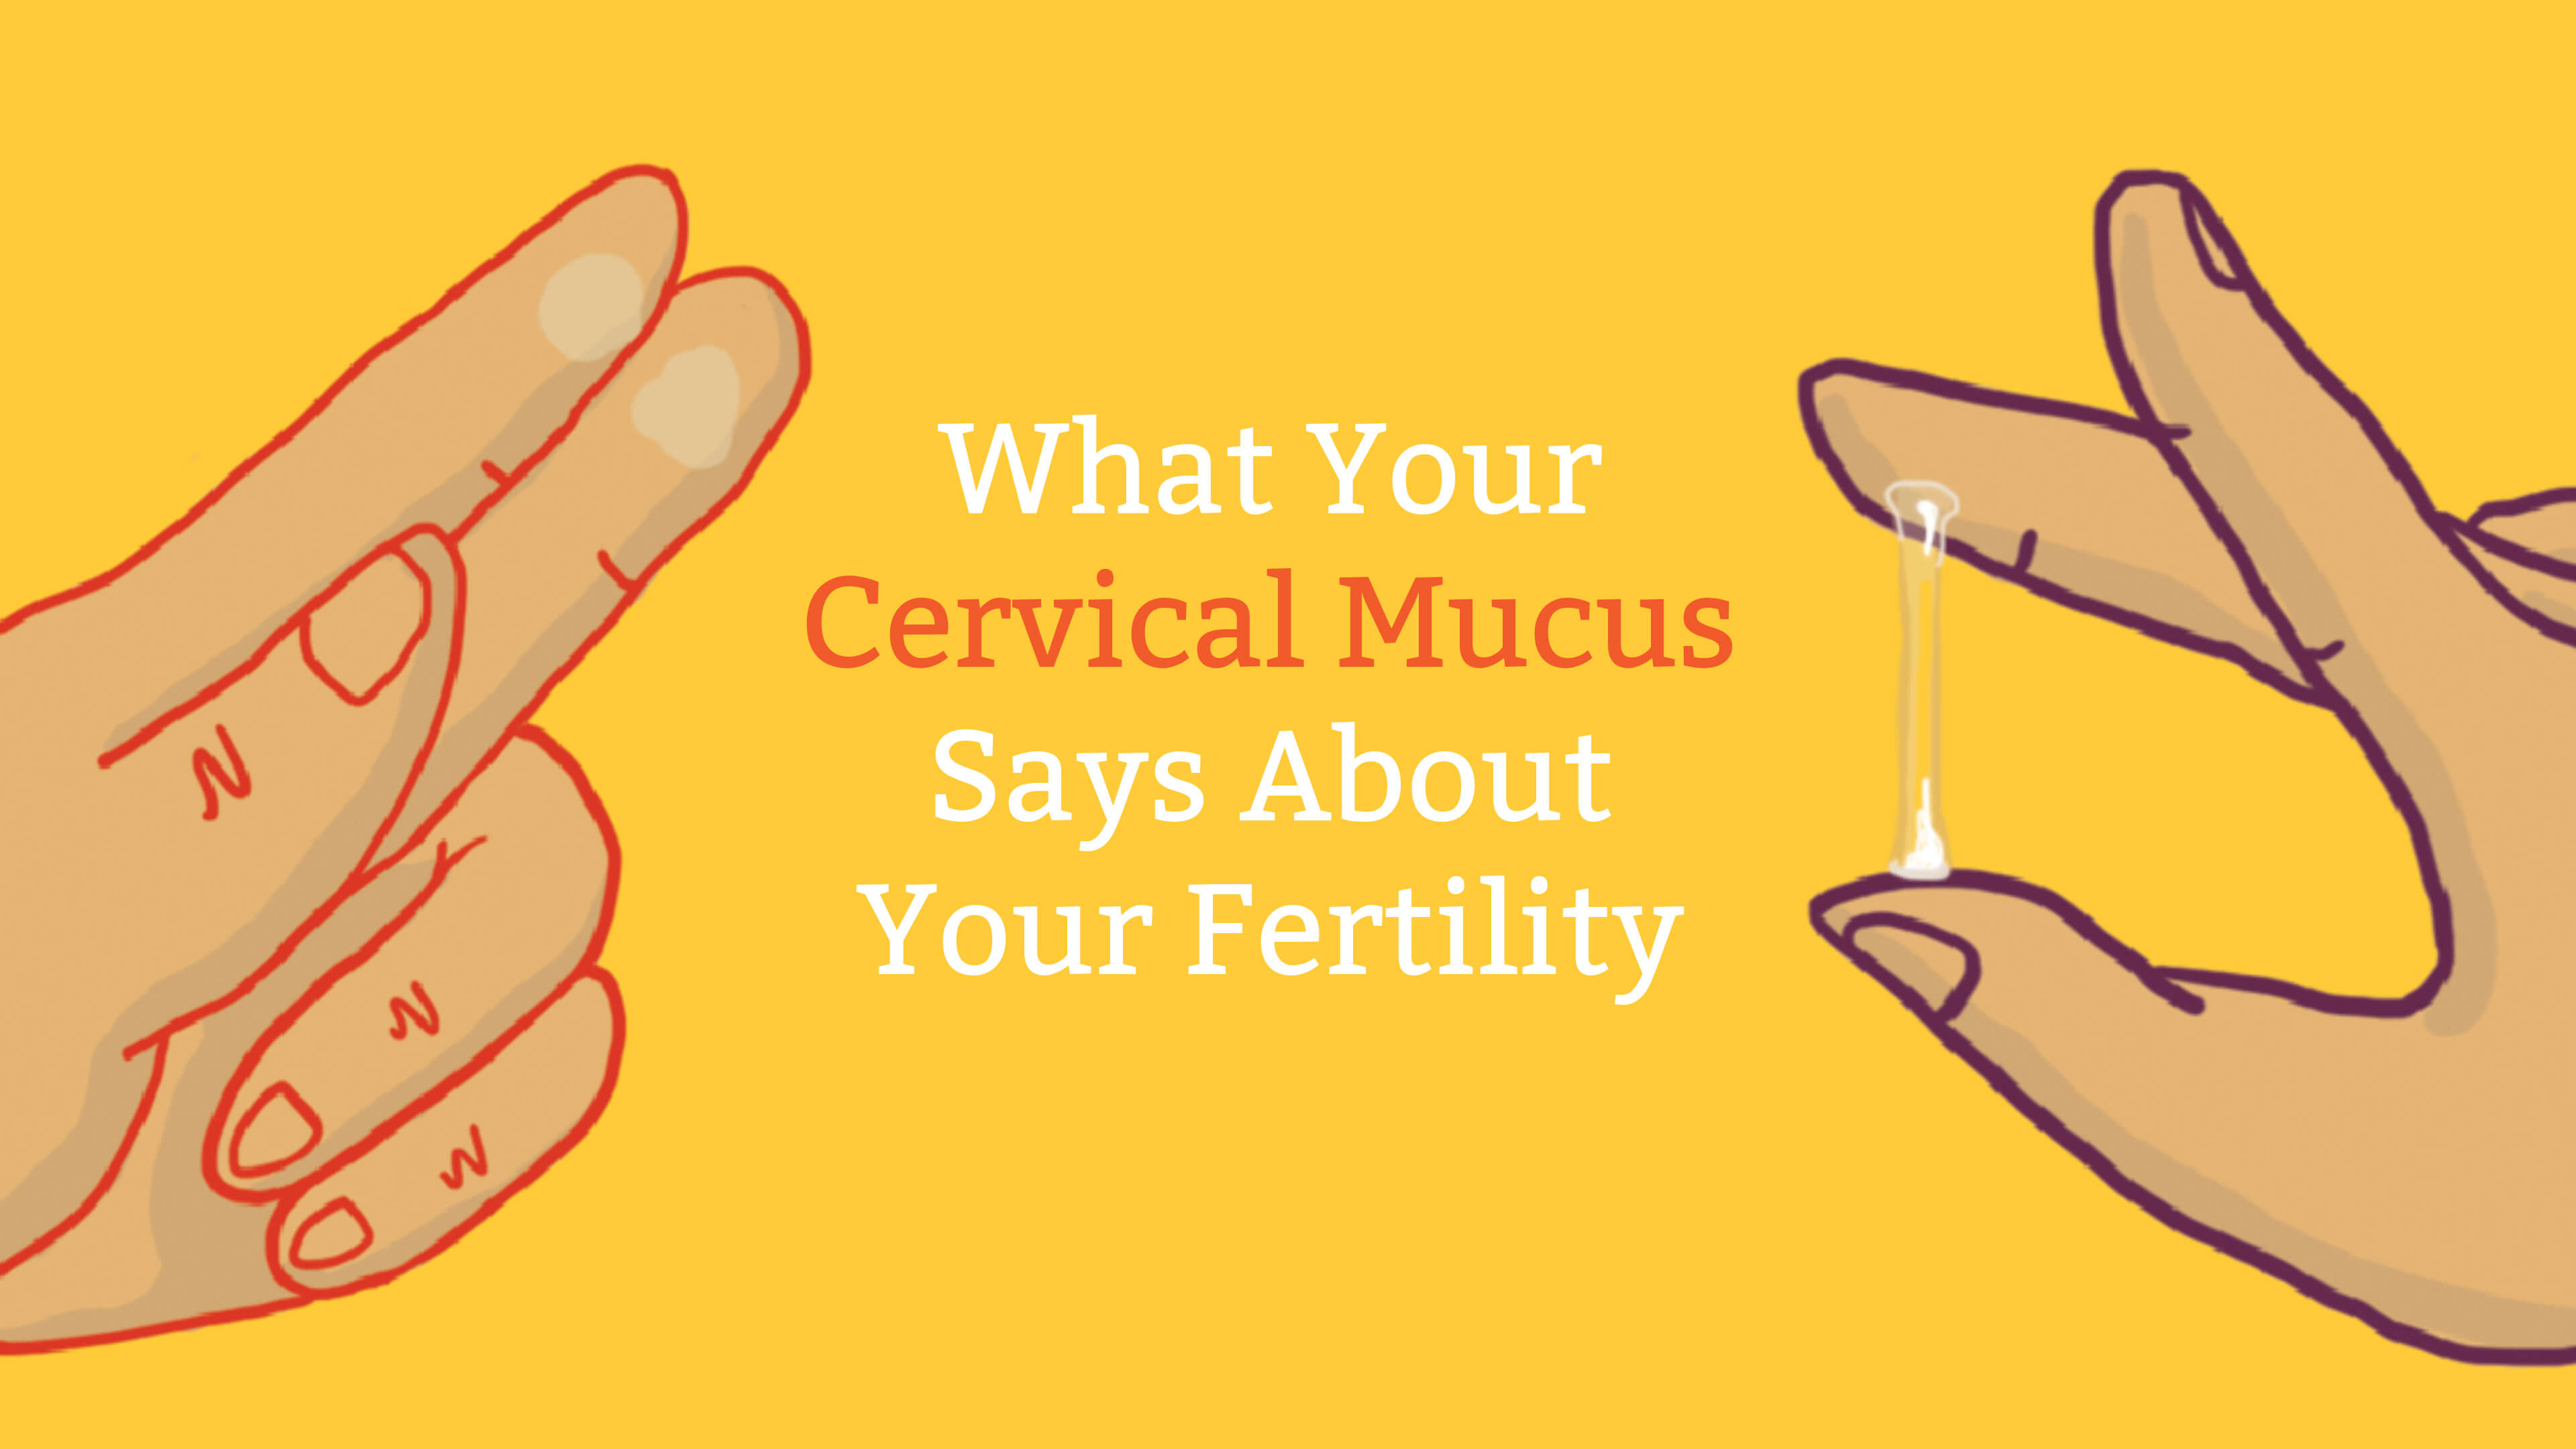 Know When You're Most Fertile - The IVF Center